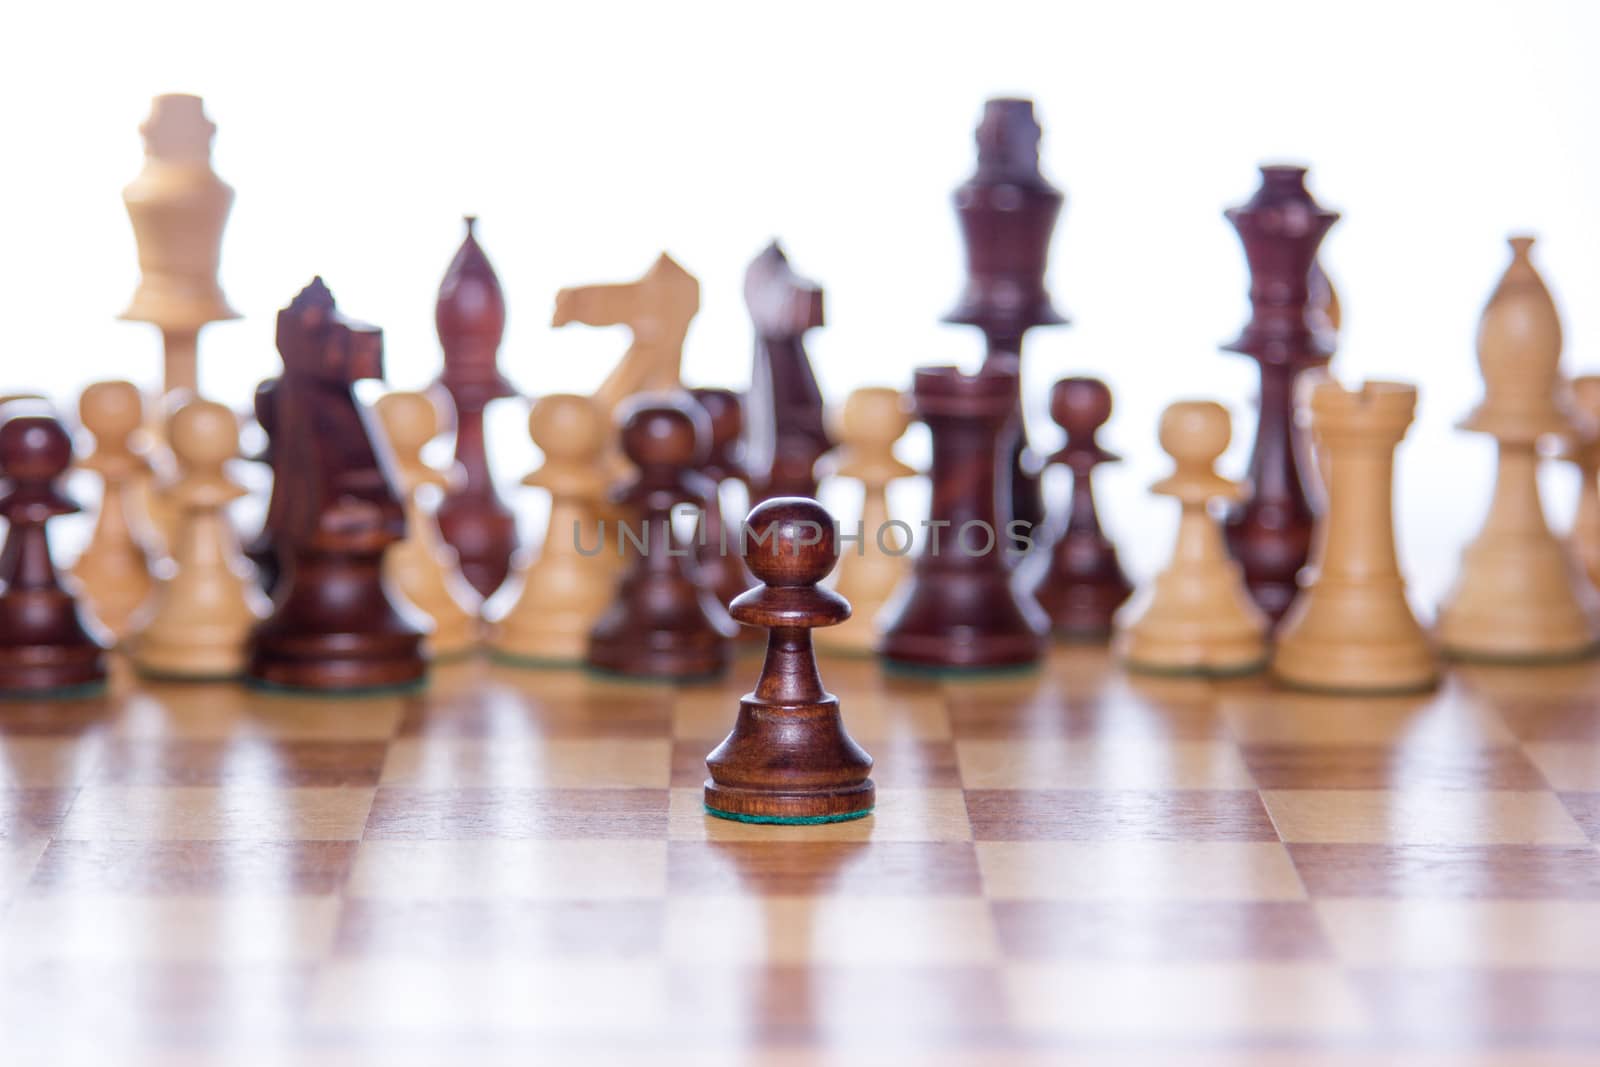 Beautiful chessboard with chessfigures in the back and a focused pawn in the front